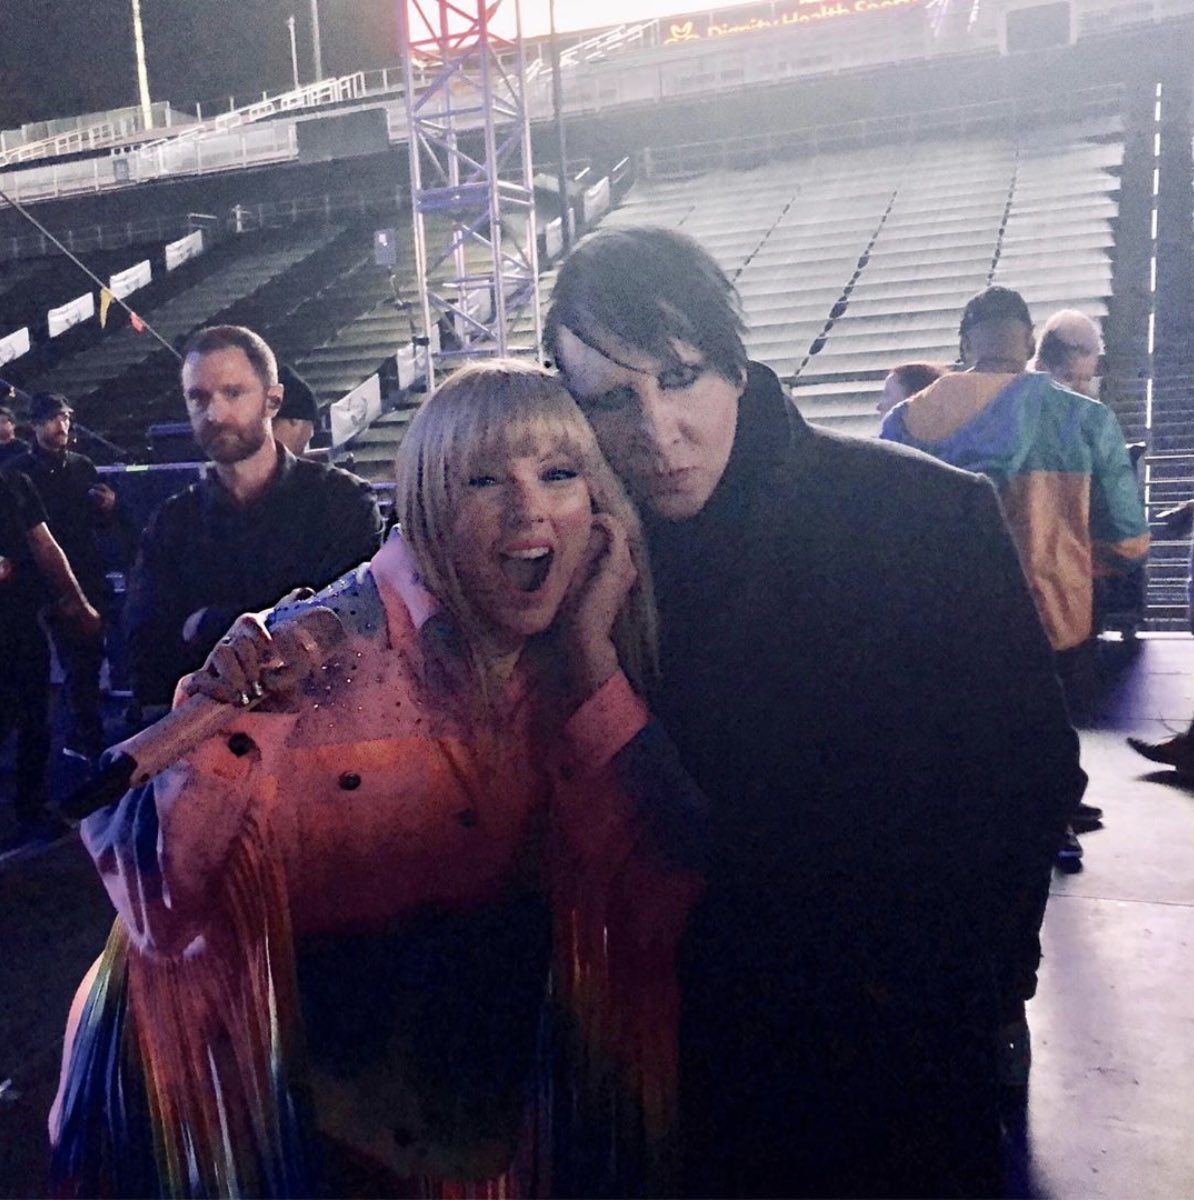 remember that time Taylor Swift was hanging out with Marilyn Manson #fridaymorning